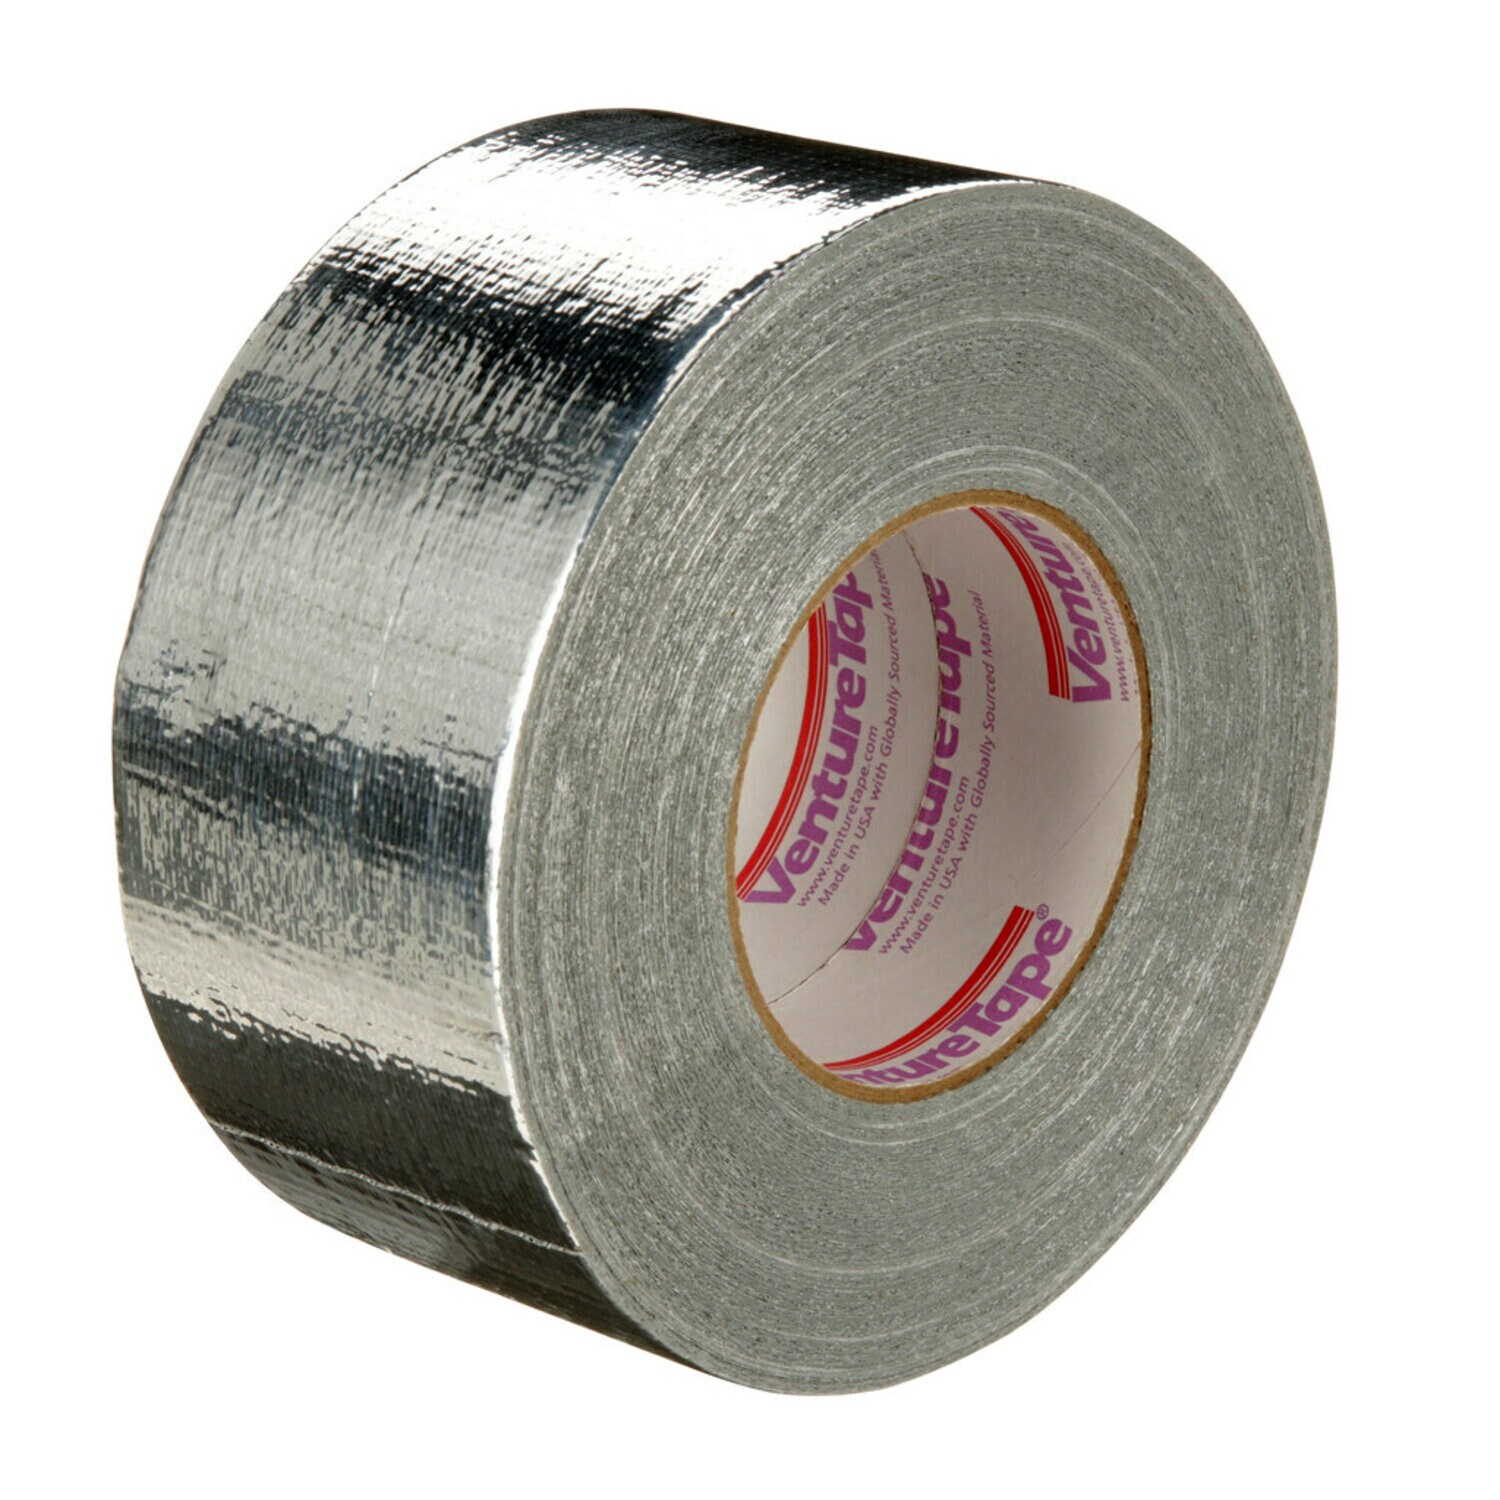 7010296281 - 3M Venture Tape Metallized Cloth Duct Tape 1502, Silver, 72 mm x 55 m
(2.83 in x 60.1 yd), 16/Case